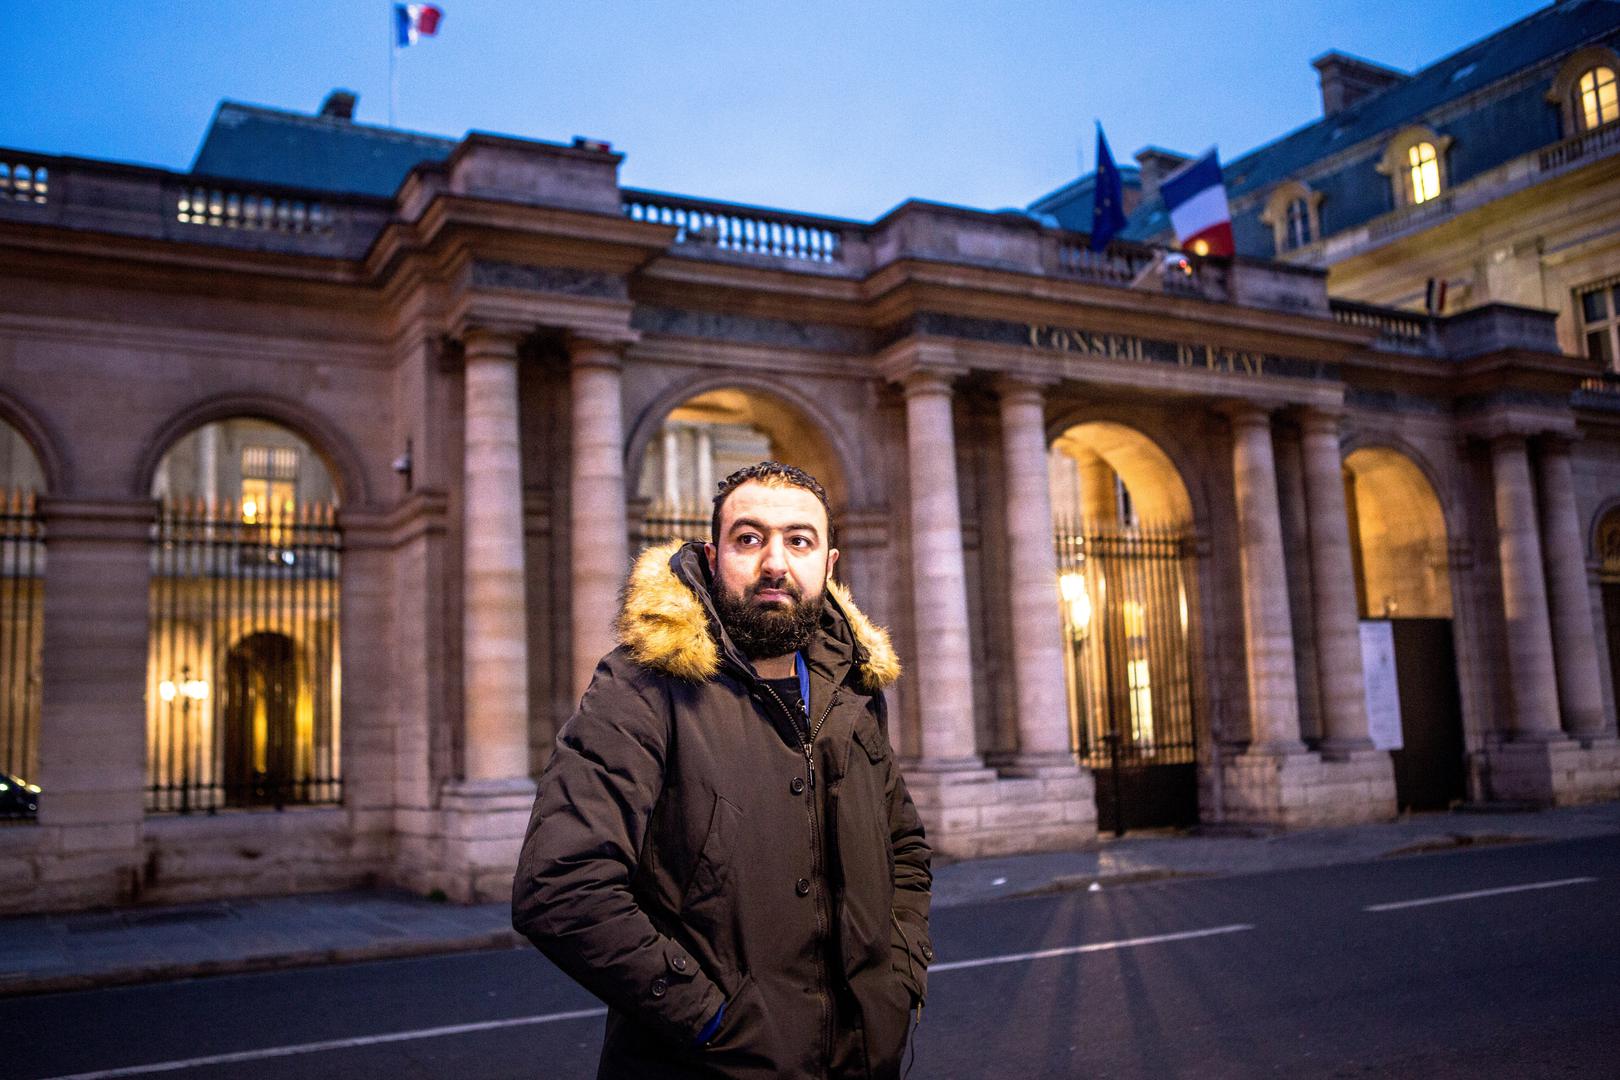 Halim A. says his reputation and business were ruined after police placed him under house arrest on November 15, 2015 during France’s state of emergency. A judge suspended the house arrest on January 23, 2016, and ordered the authorities to pay Halim €1,5